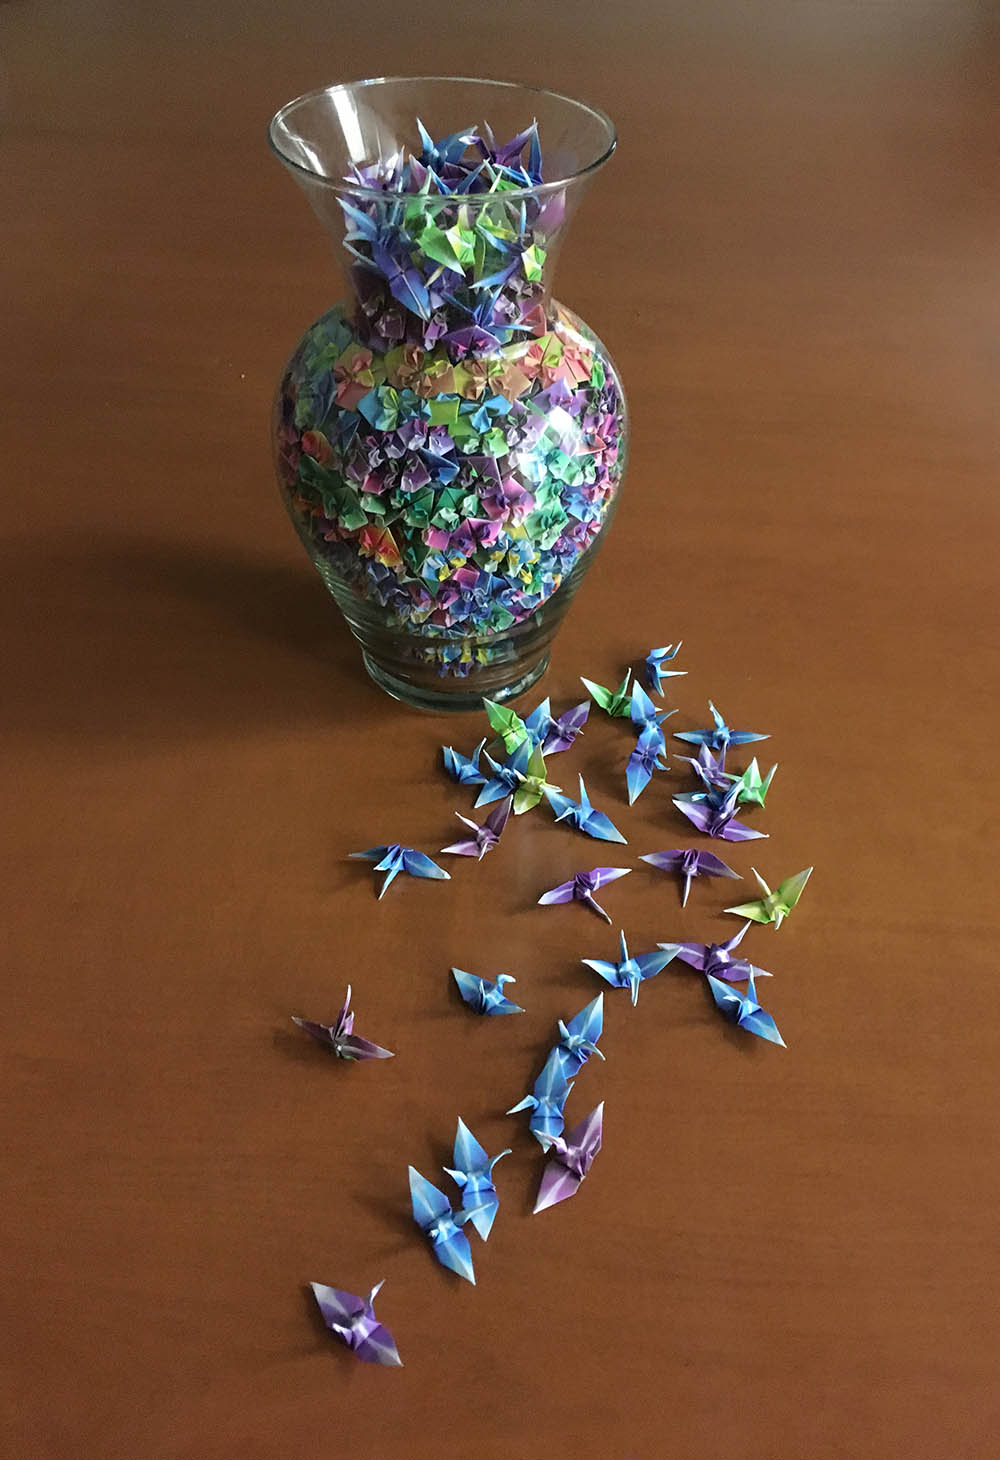 Origami cranes in a vase and on table